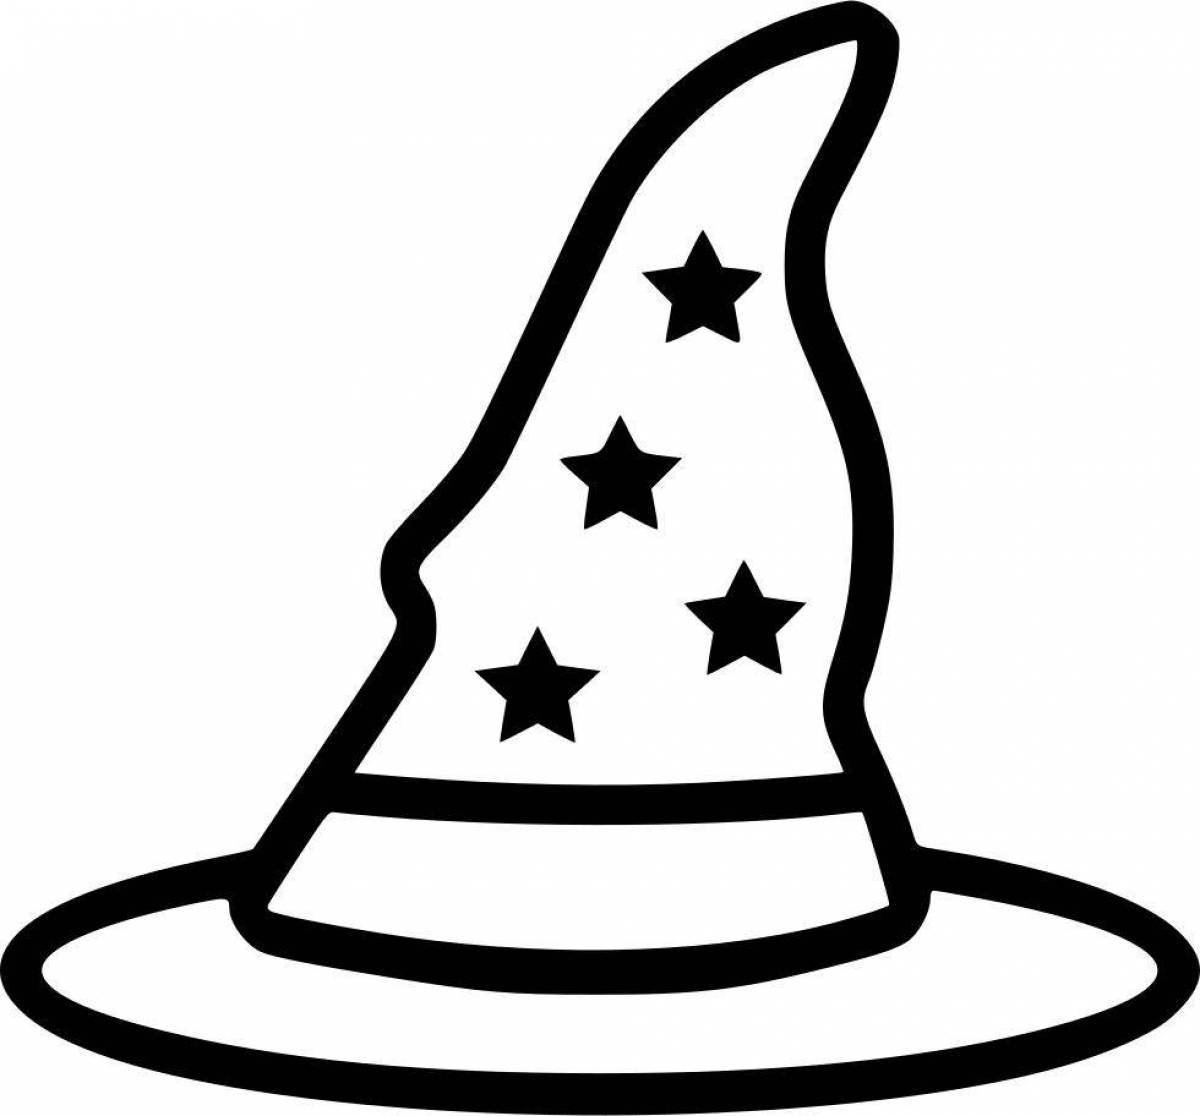 Sorcerer's shining hat coloring page